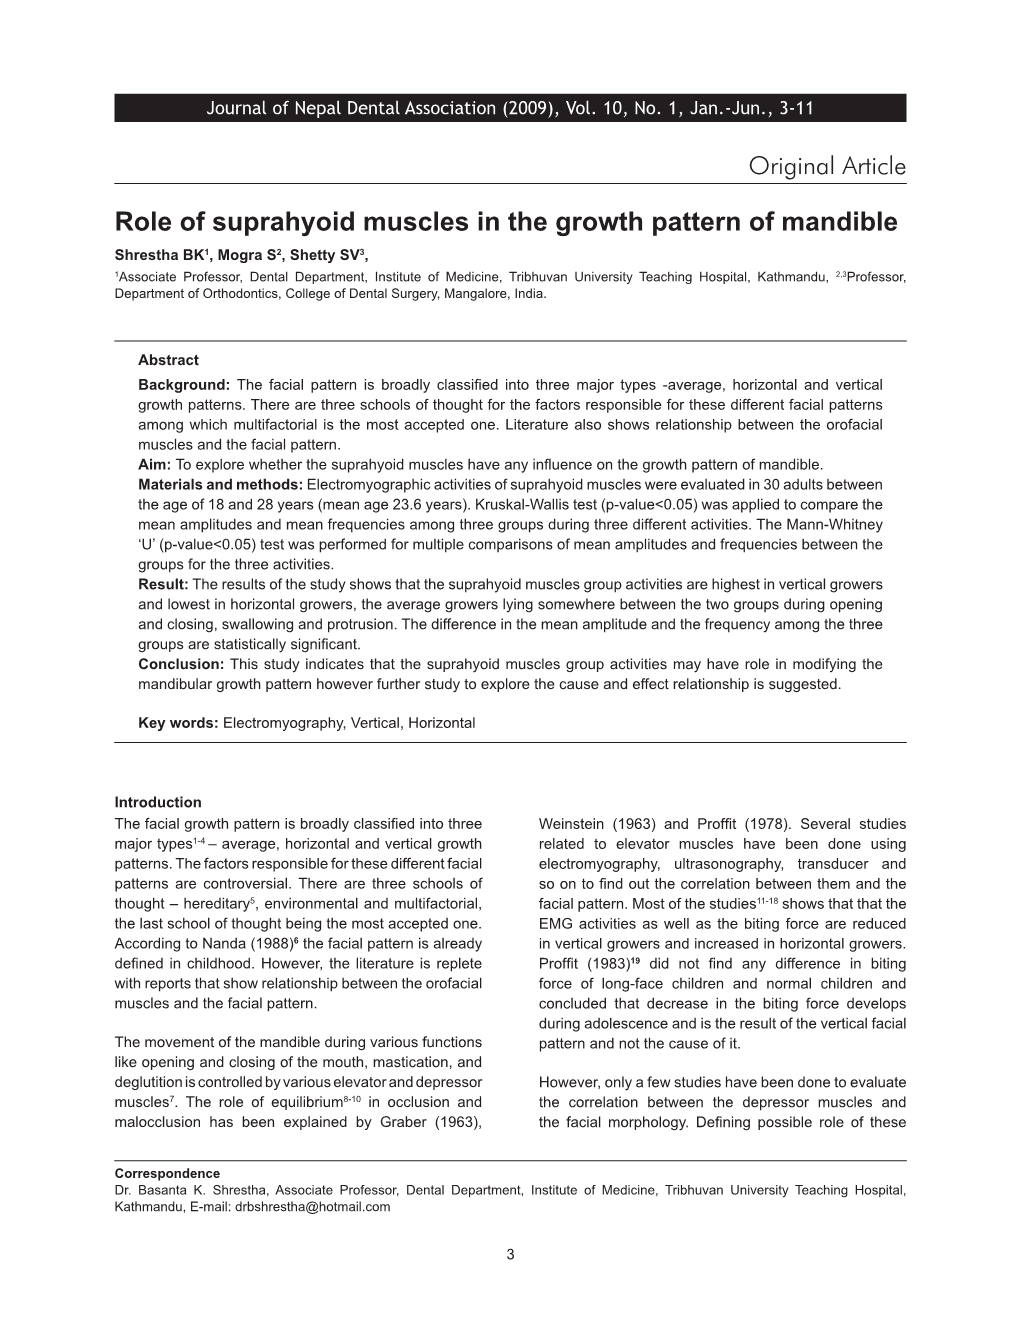 Role of Suprahyoid Muscles in the Growth Pattern of Mandible -.:: Journal of Nepal Dental Association